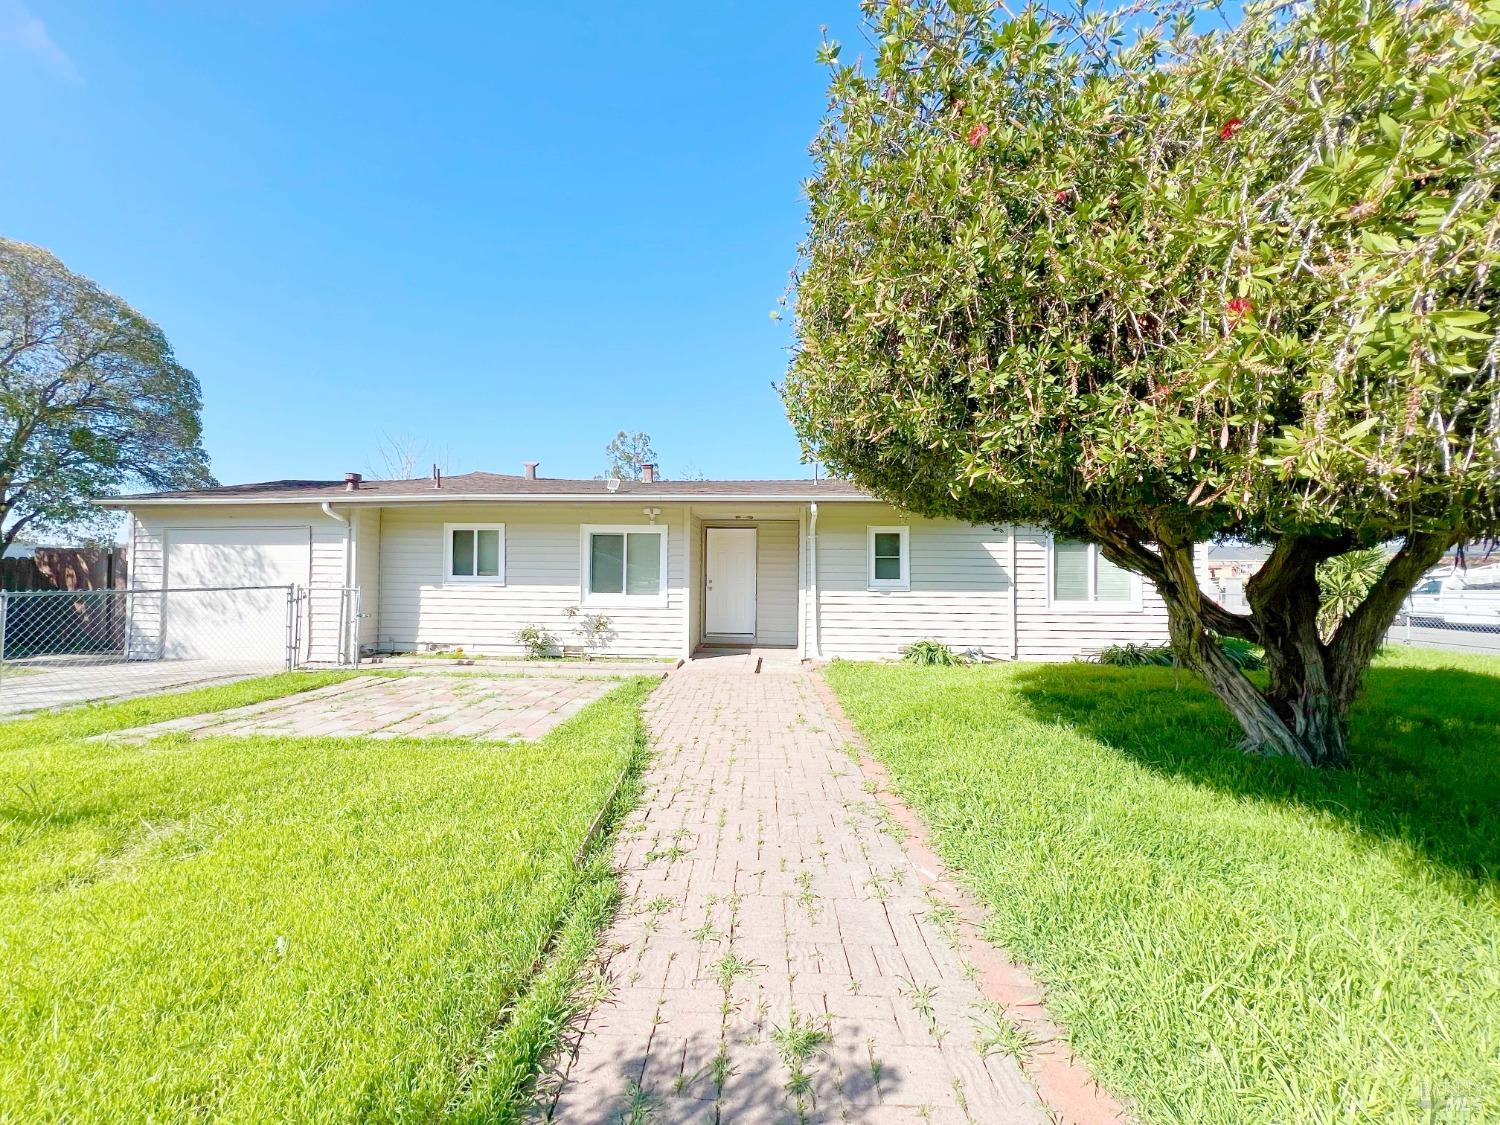 Single level 3br/1.5ba remodeled in 2017. Large eat in kitchen with plentiful cabinet space. Generou